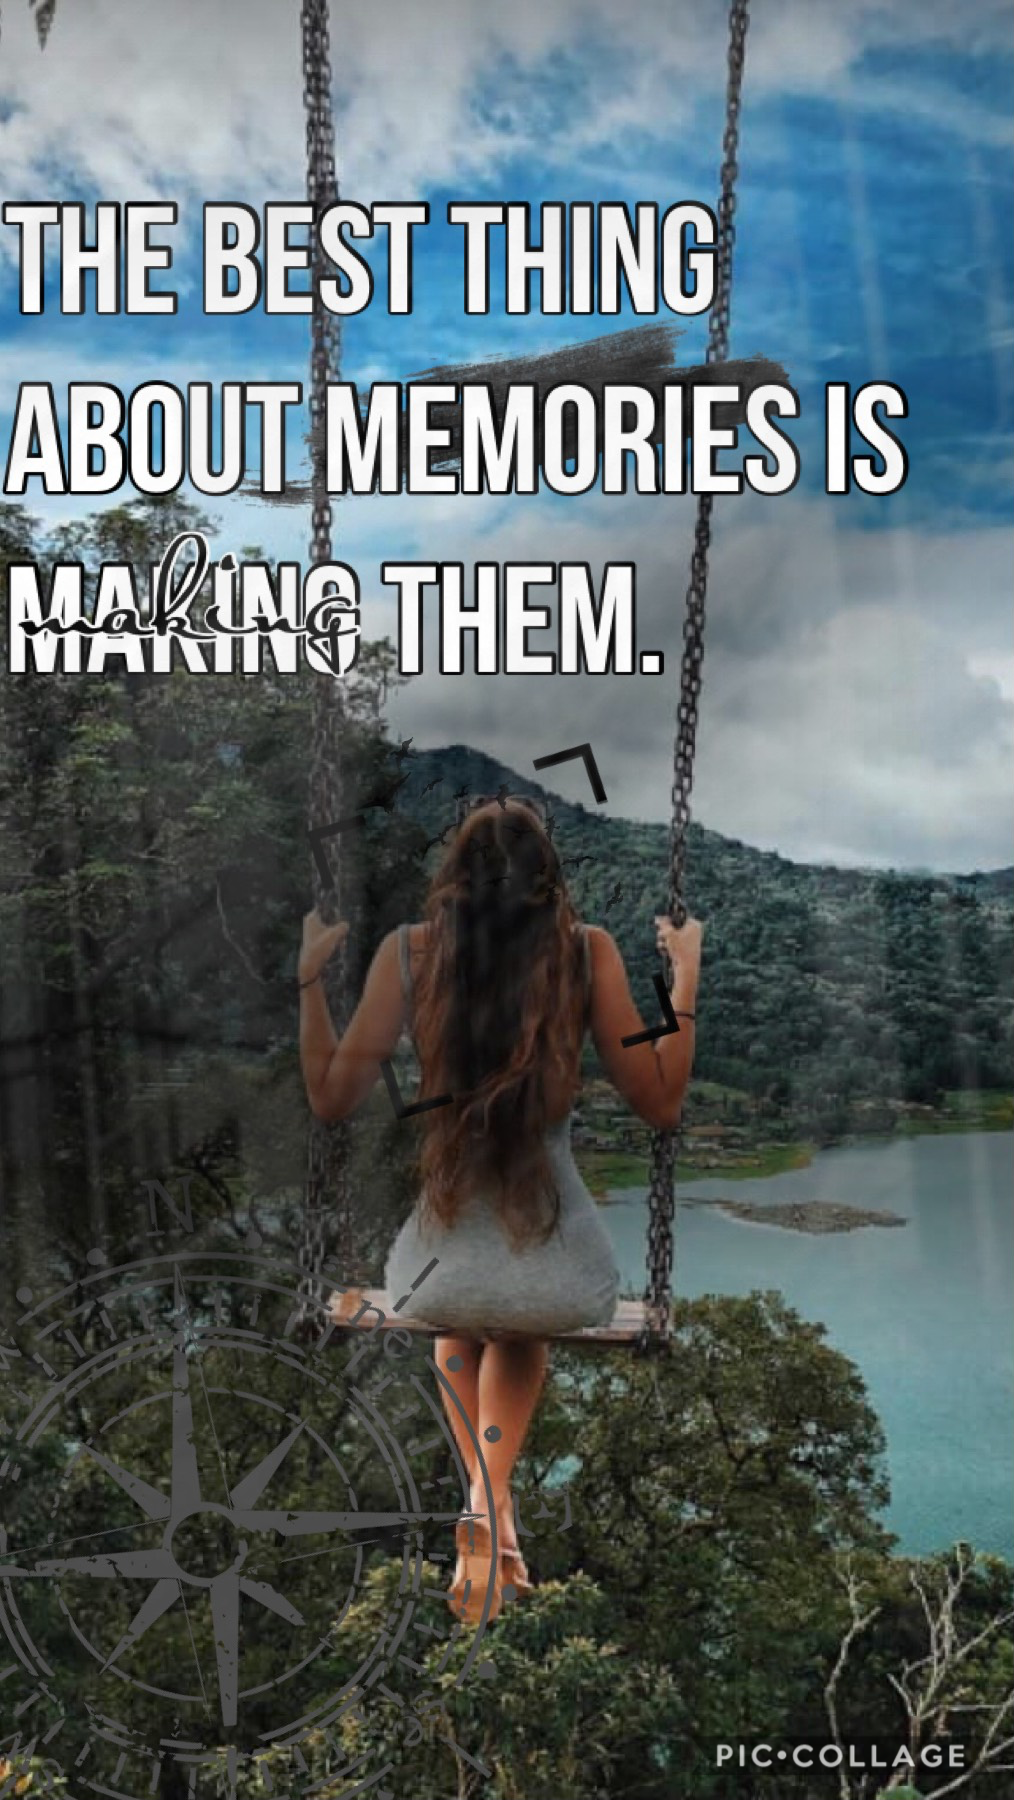 Tap>🥳
What’s your favorite memory?

Shoutout to... insane-  go follow them!!!! They have awesome backgrounds that you can use as long as you give credit!

1/10/19